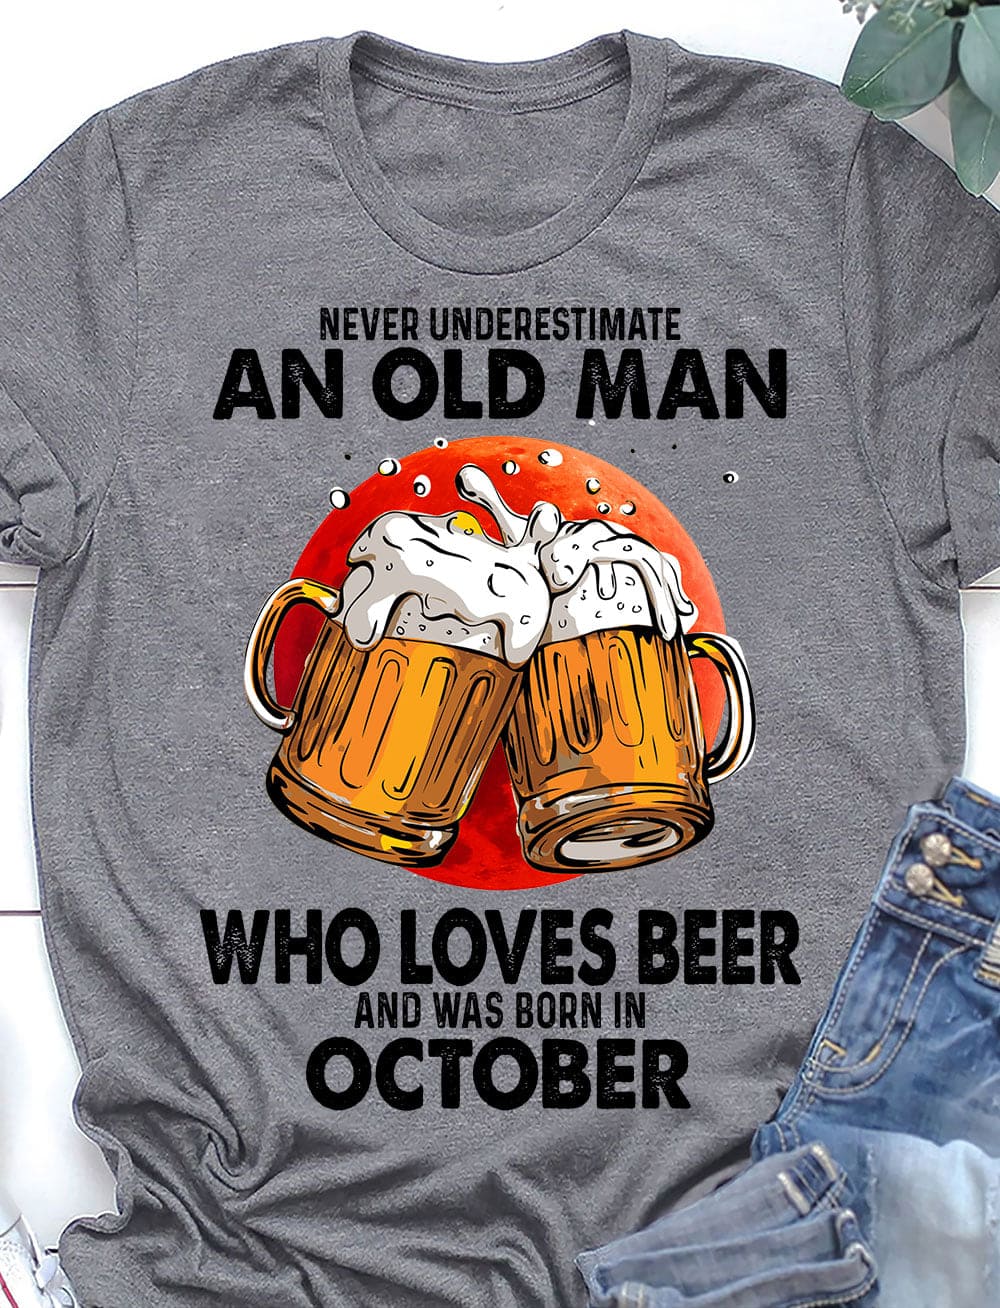 Never underestimate an old man who loves beer and was born in October - October beer drinker